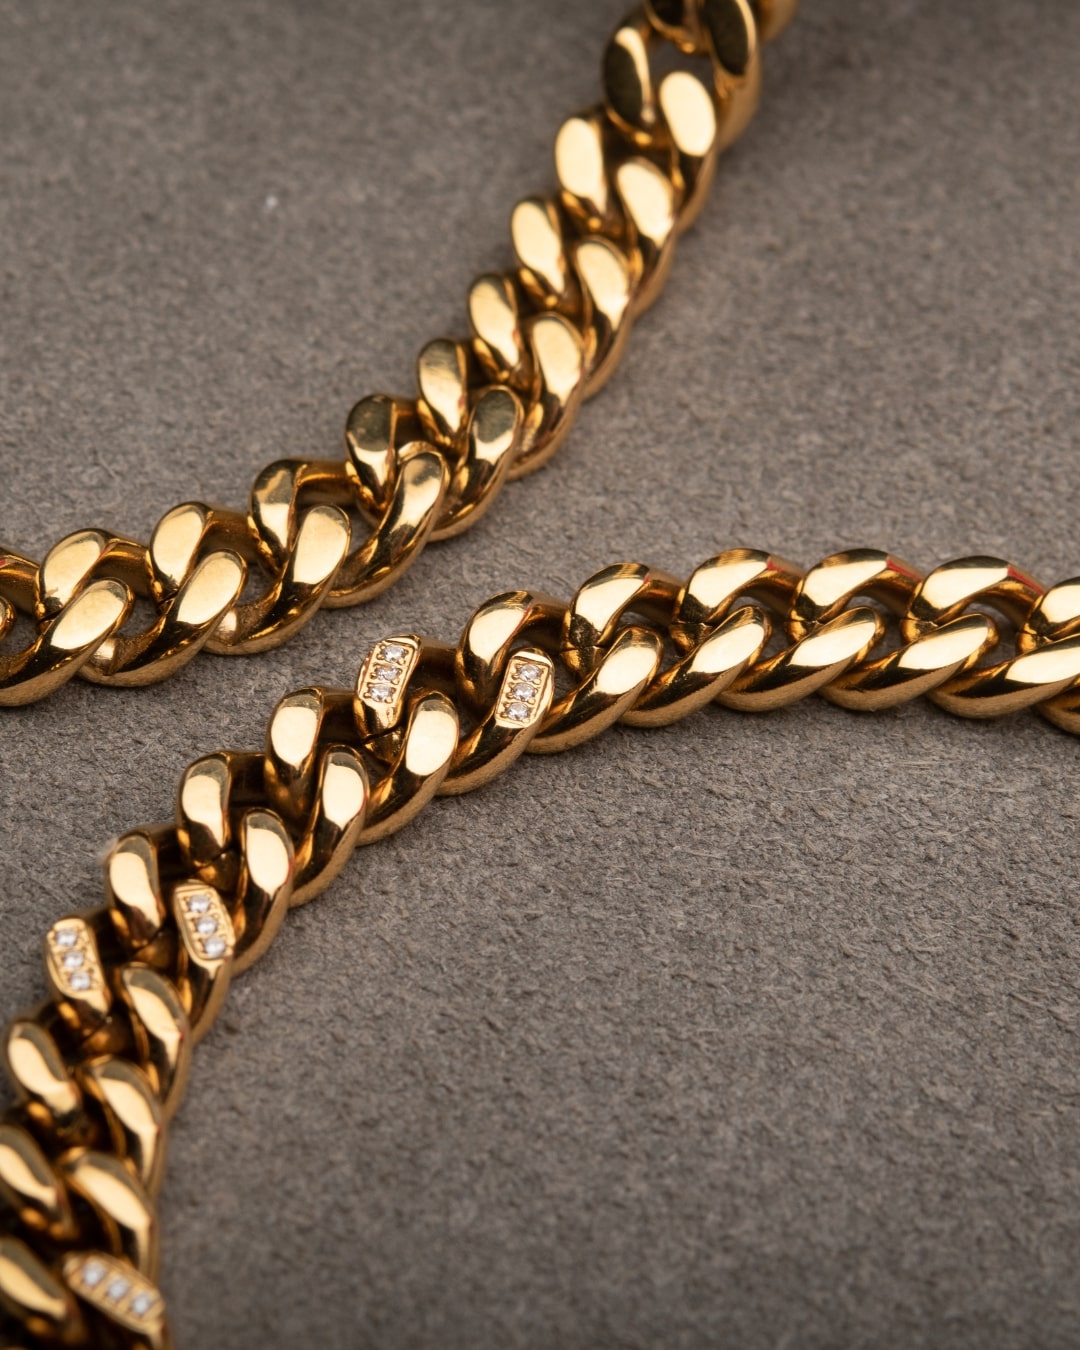 12mm 18Kt Gold IP Miami Cuban Chain Necklace with CNC Precis